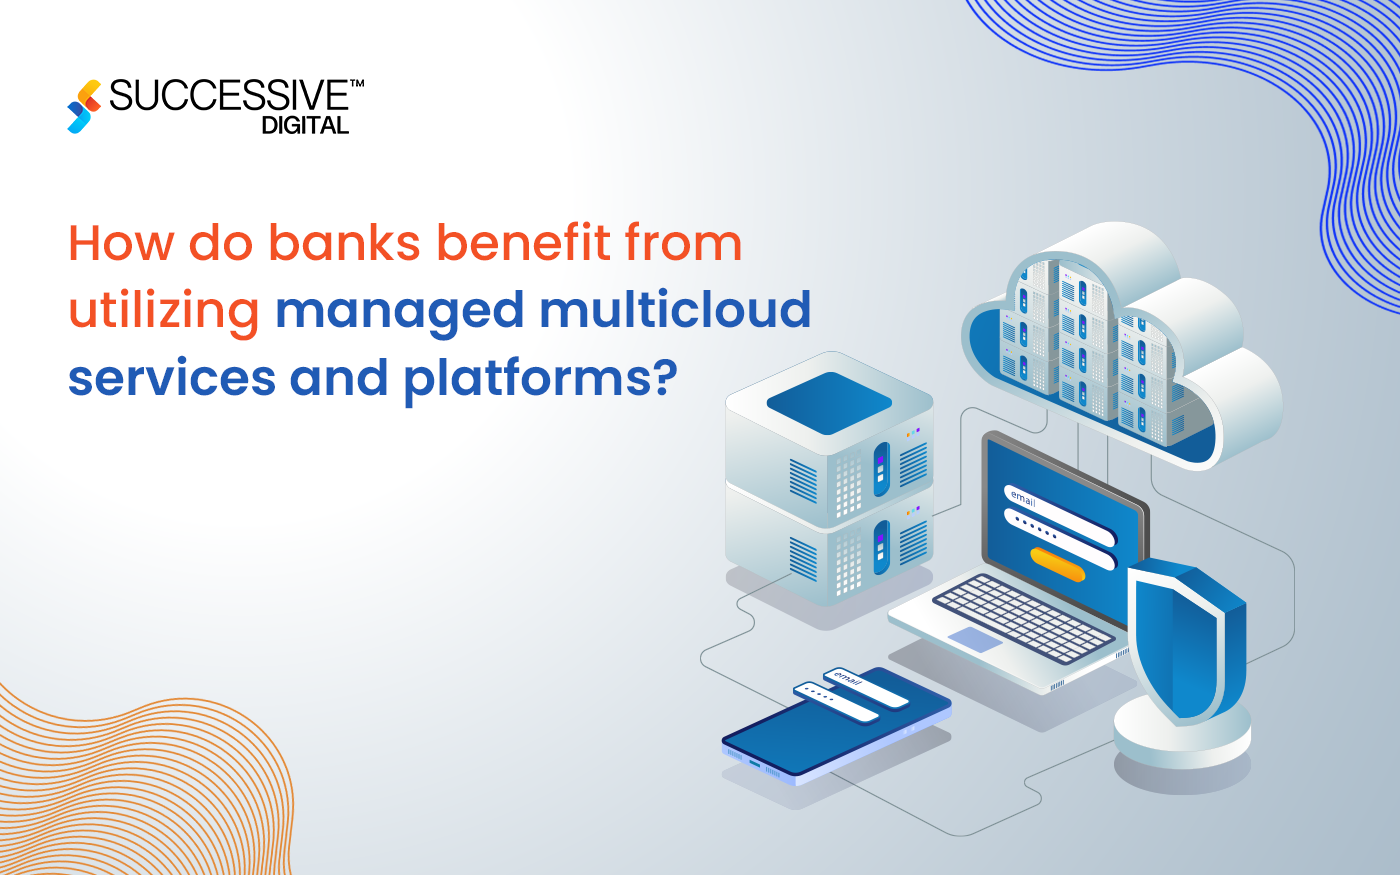 How do Banks Benefit from Utilizing Managed Multicloud Services and Platforms?